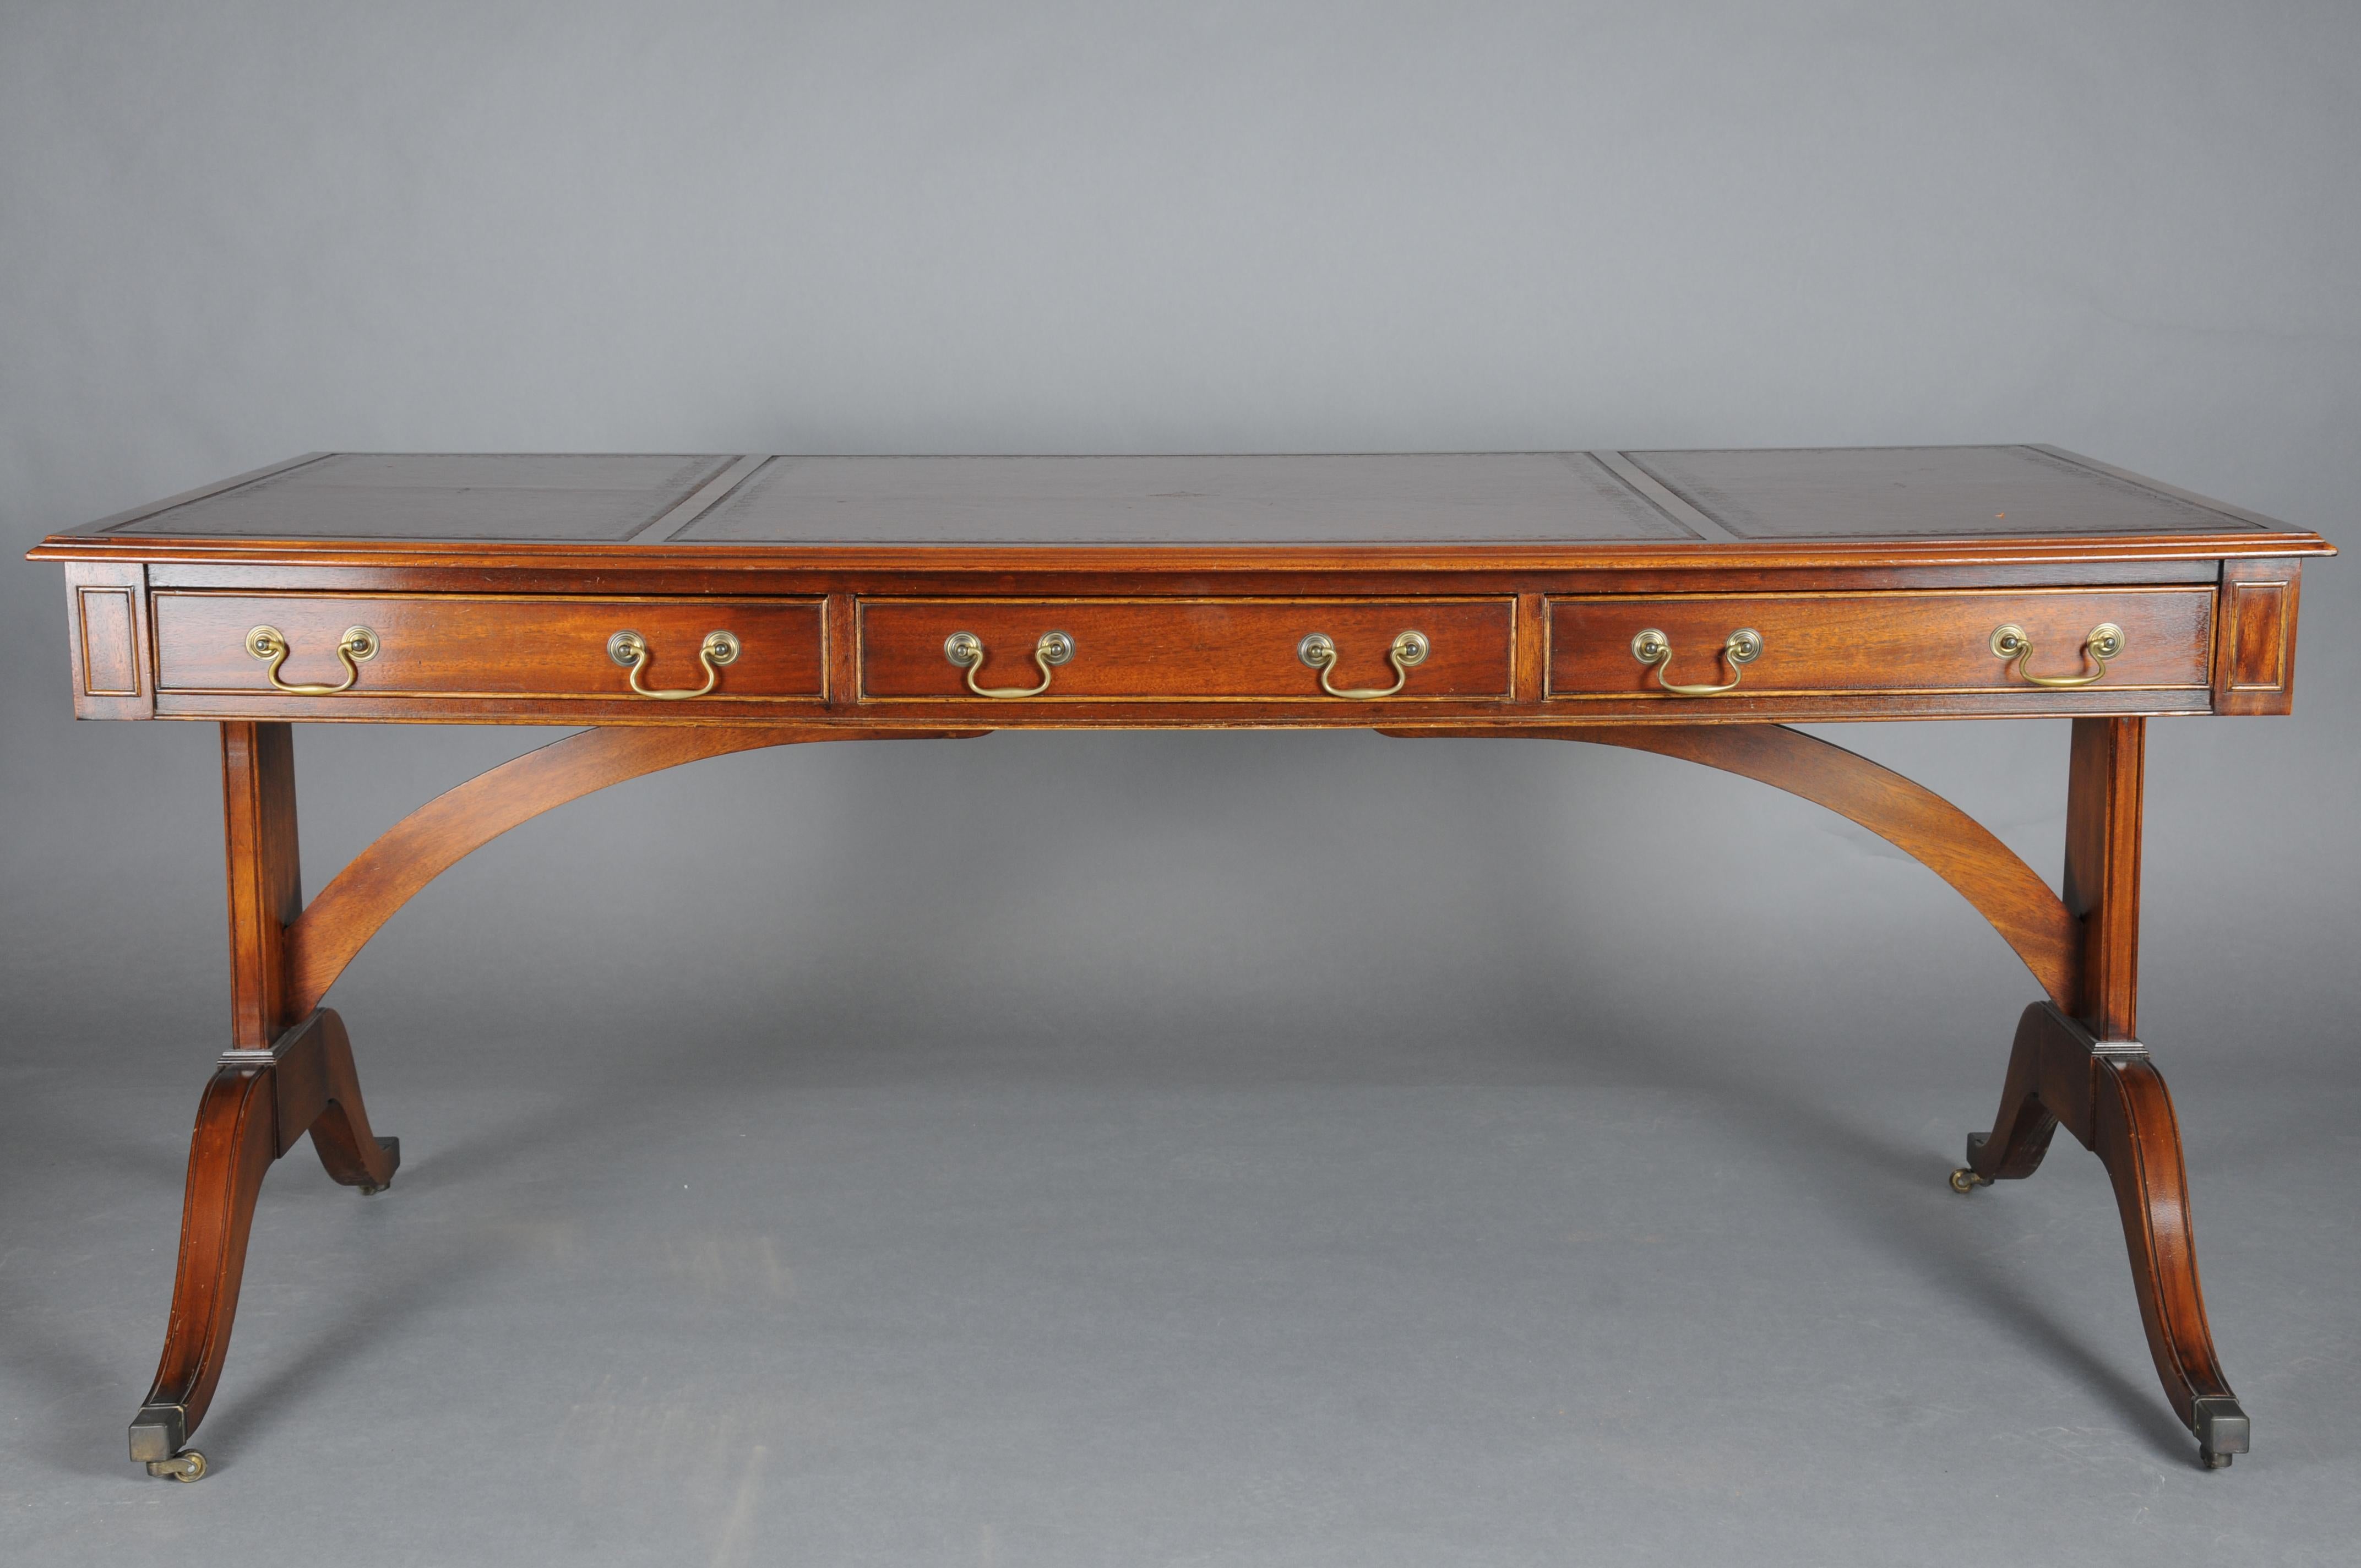 Great English Partner Desk/Writing Desk 20th Century, Mahogany

Solid mahogany, partially veneered. Three-drawer frame profiled on both sides, slightly protruding table top. Writing surface decorated with unusual gold embossing. Decorative brass